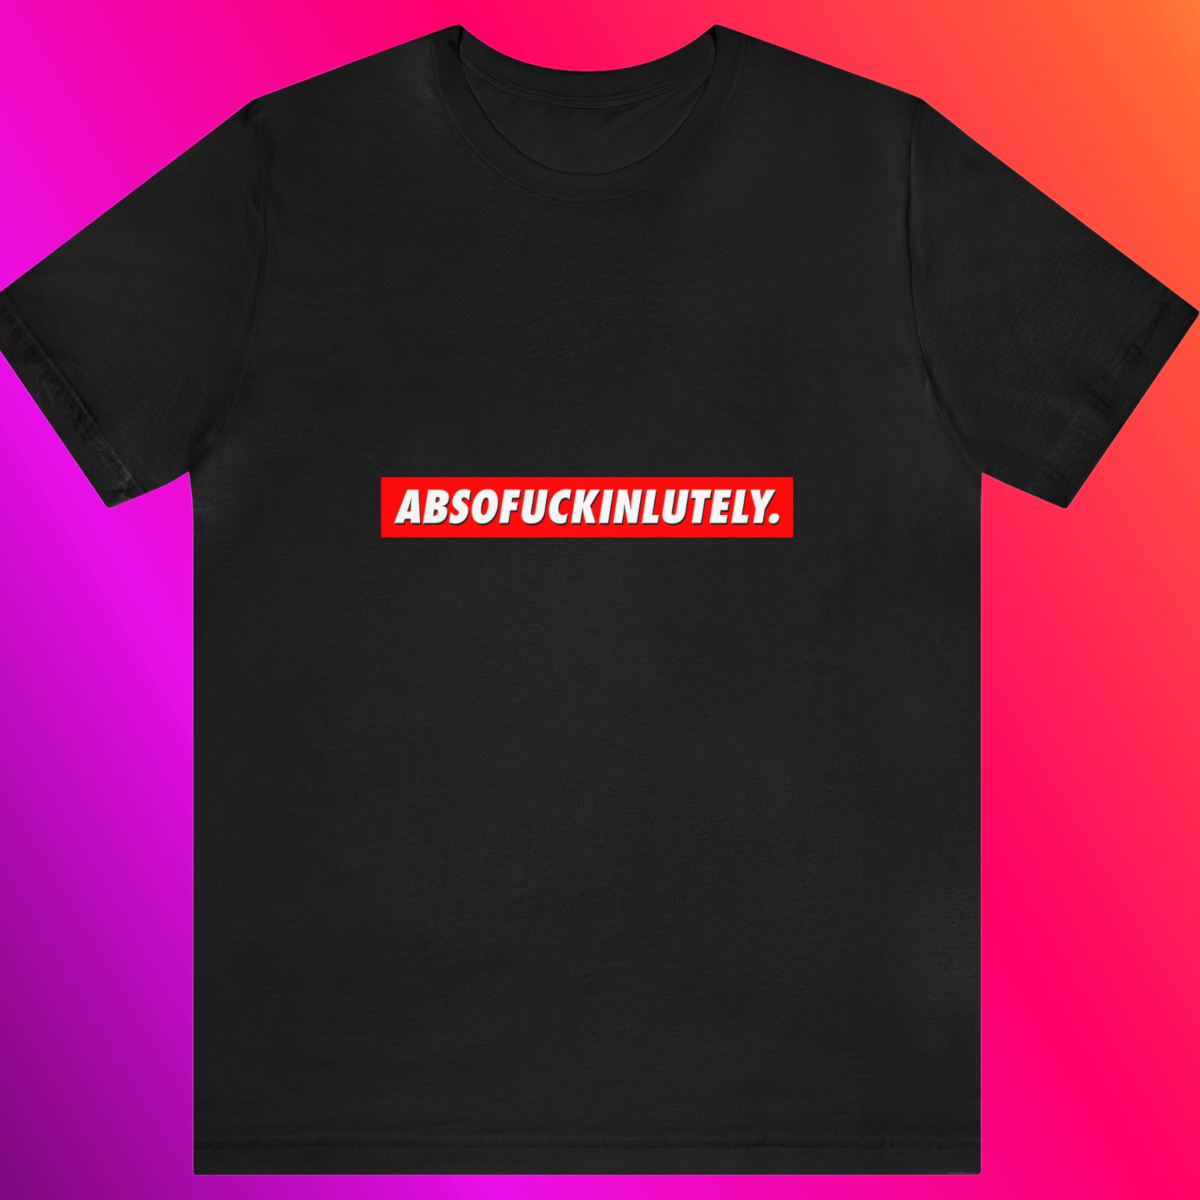 An eye-catching Absofuckinlutely T-Shirt with a bold red logo that says afropunk.